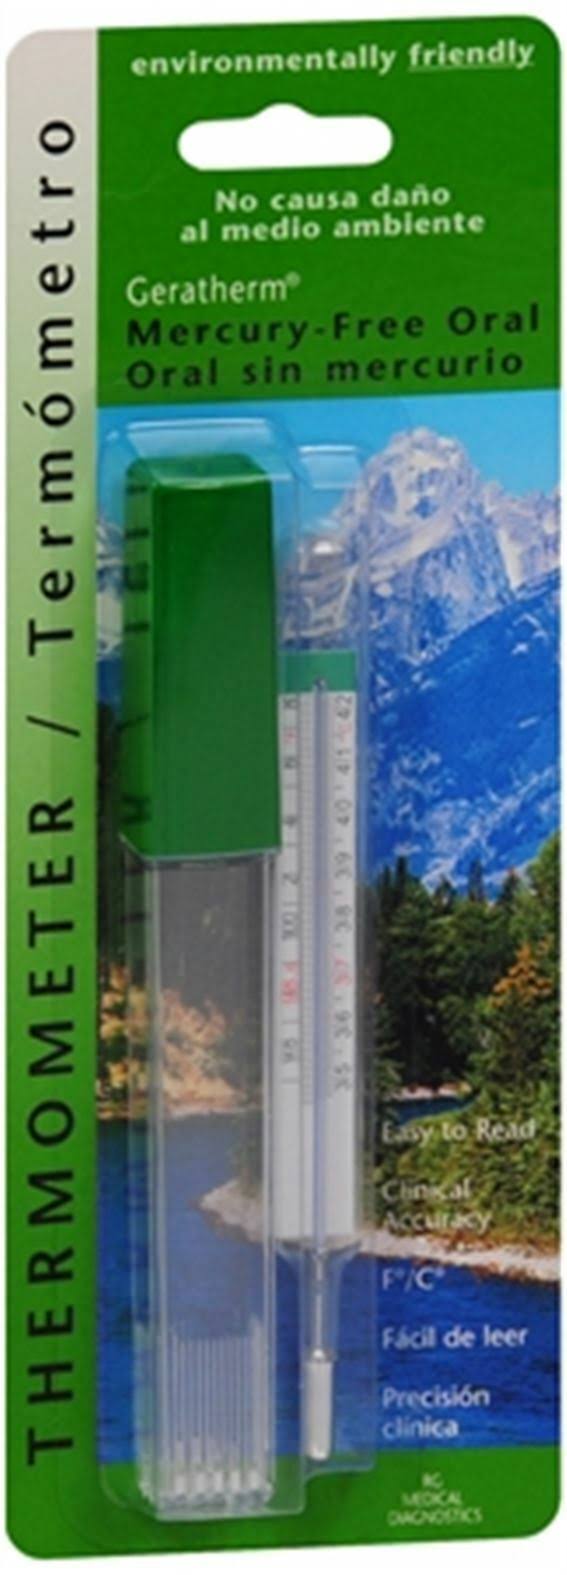 Geratherm Thermometer Oral Mercury Free - 1 count